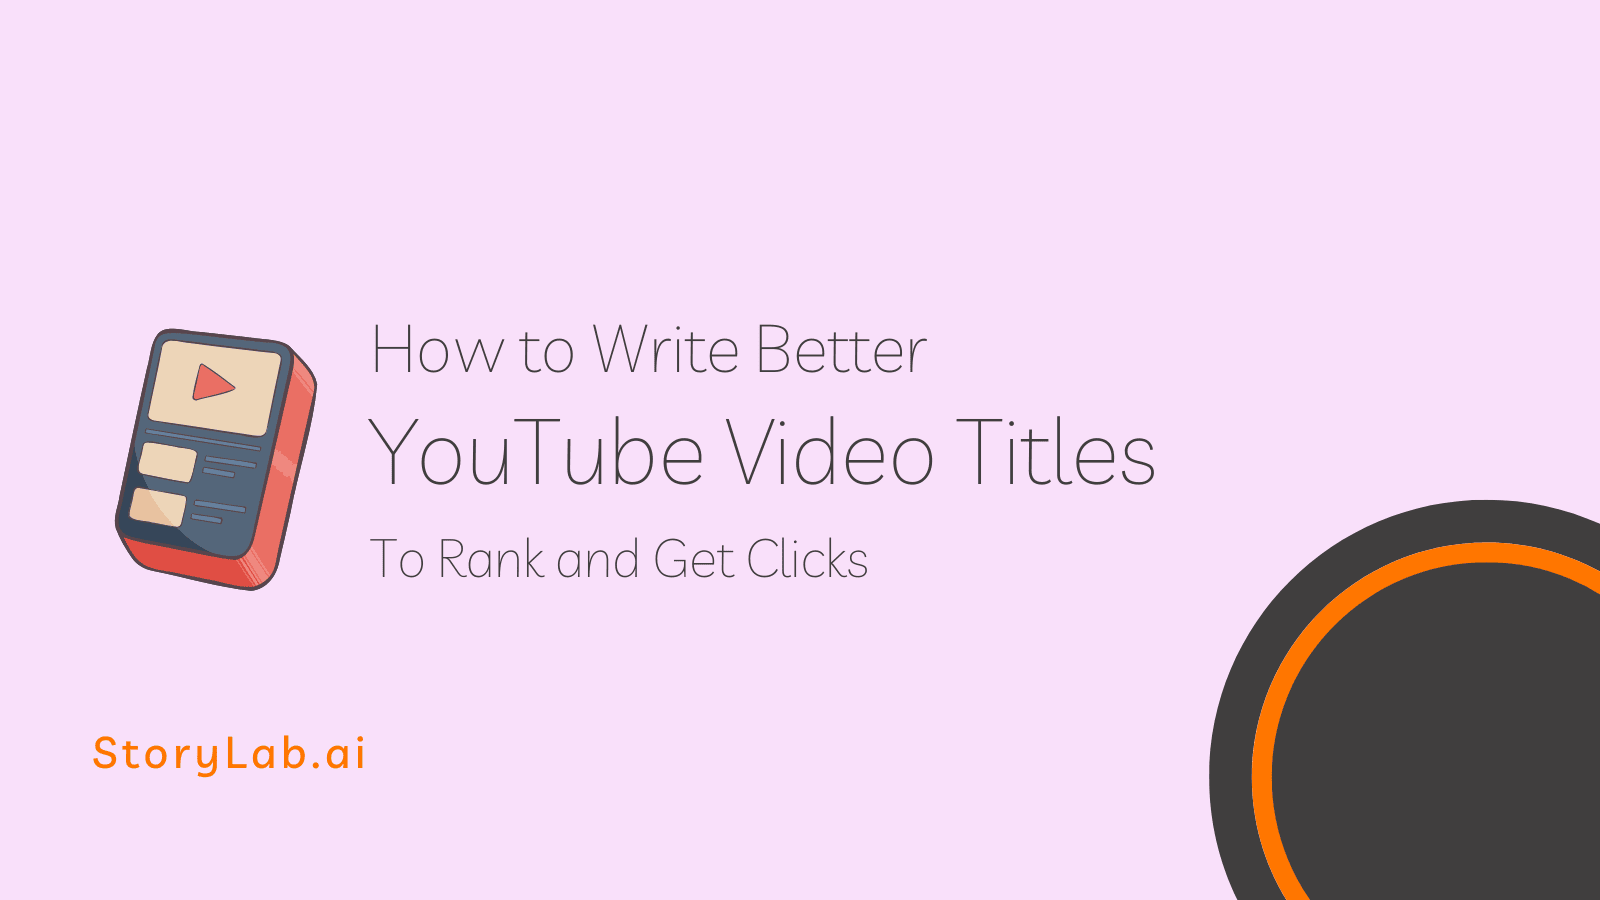 How to Write Better YouTube Video Titles to Rank and Get Clicks